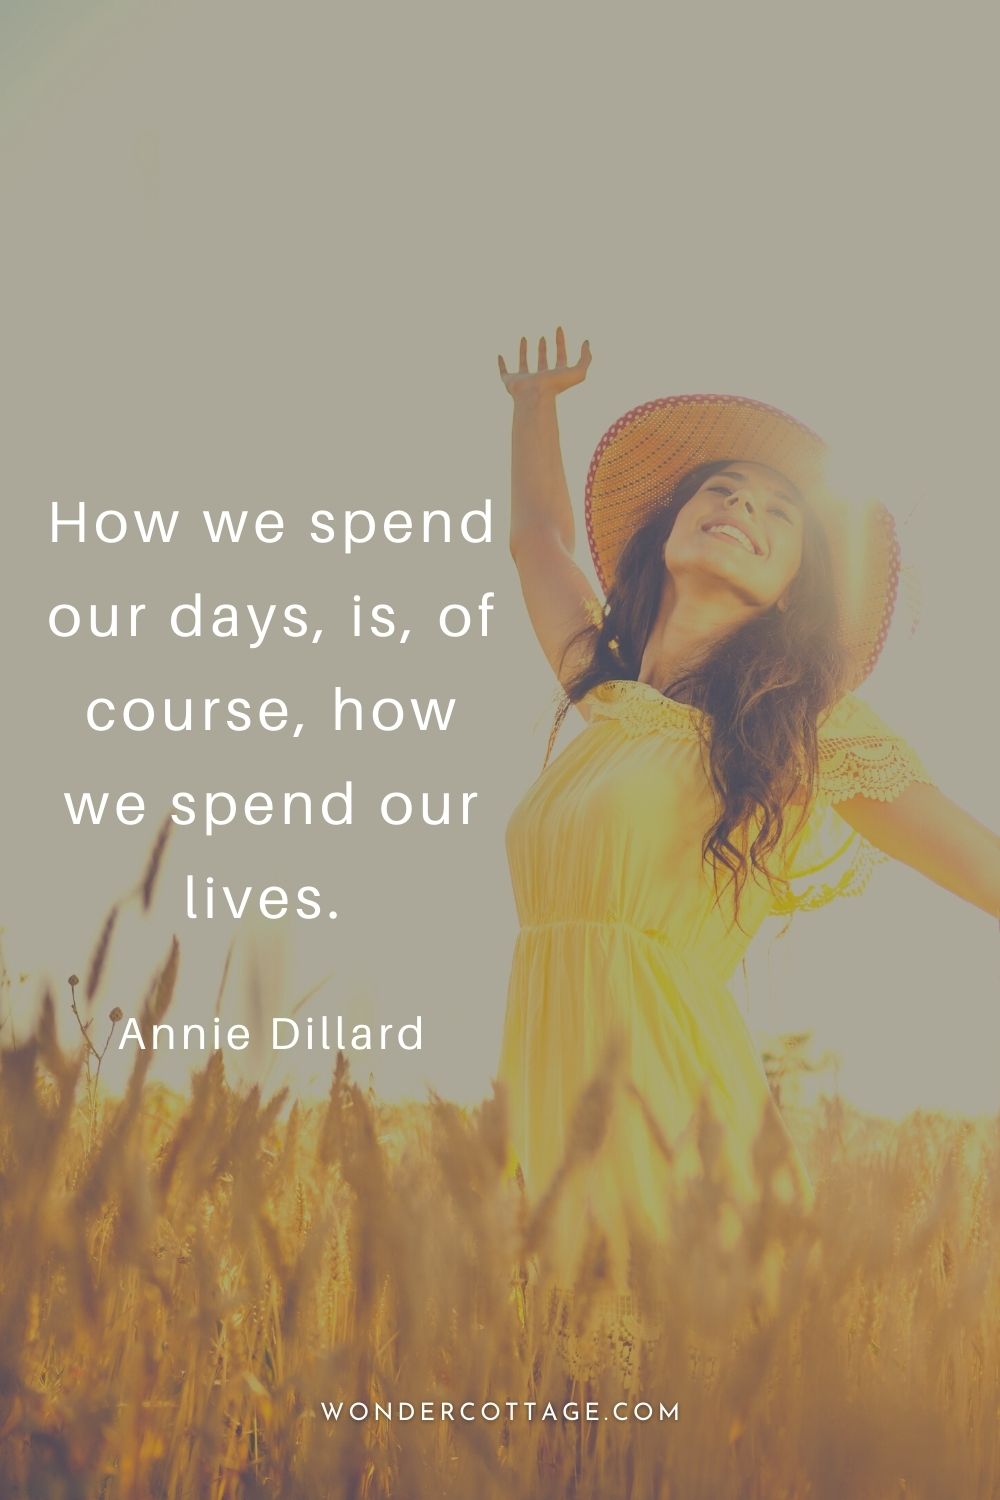 How we spend our days, is, of course, how we spend our lives.  Annie Dillard
Time Quotes